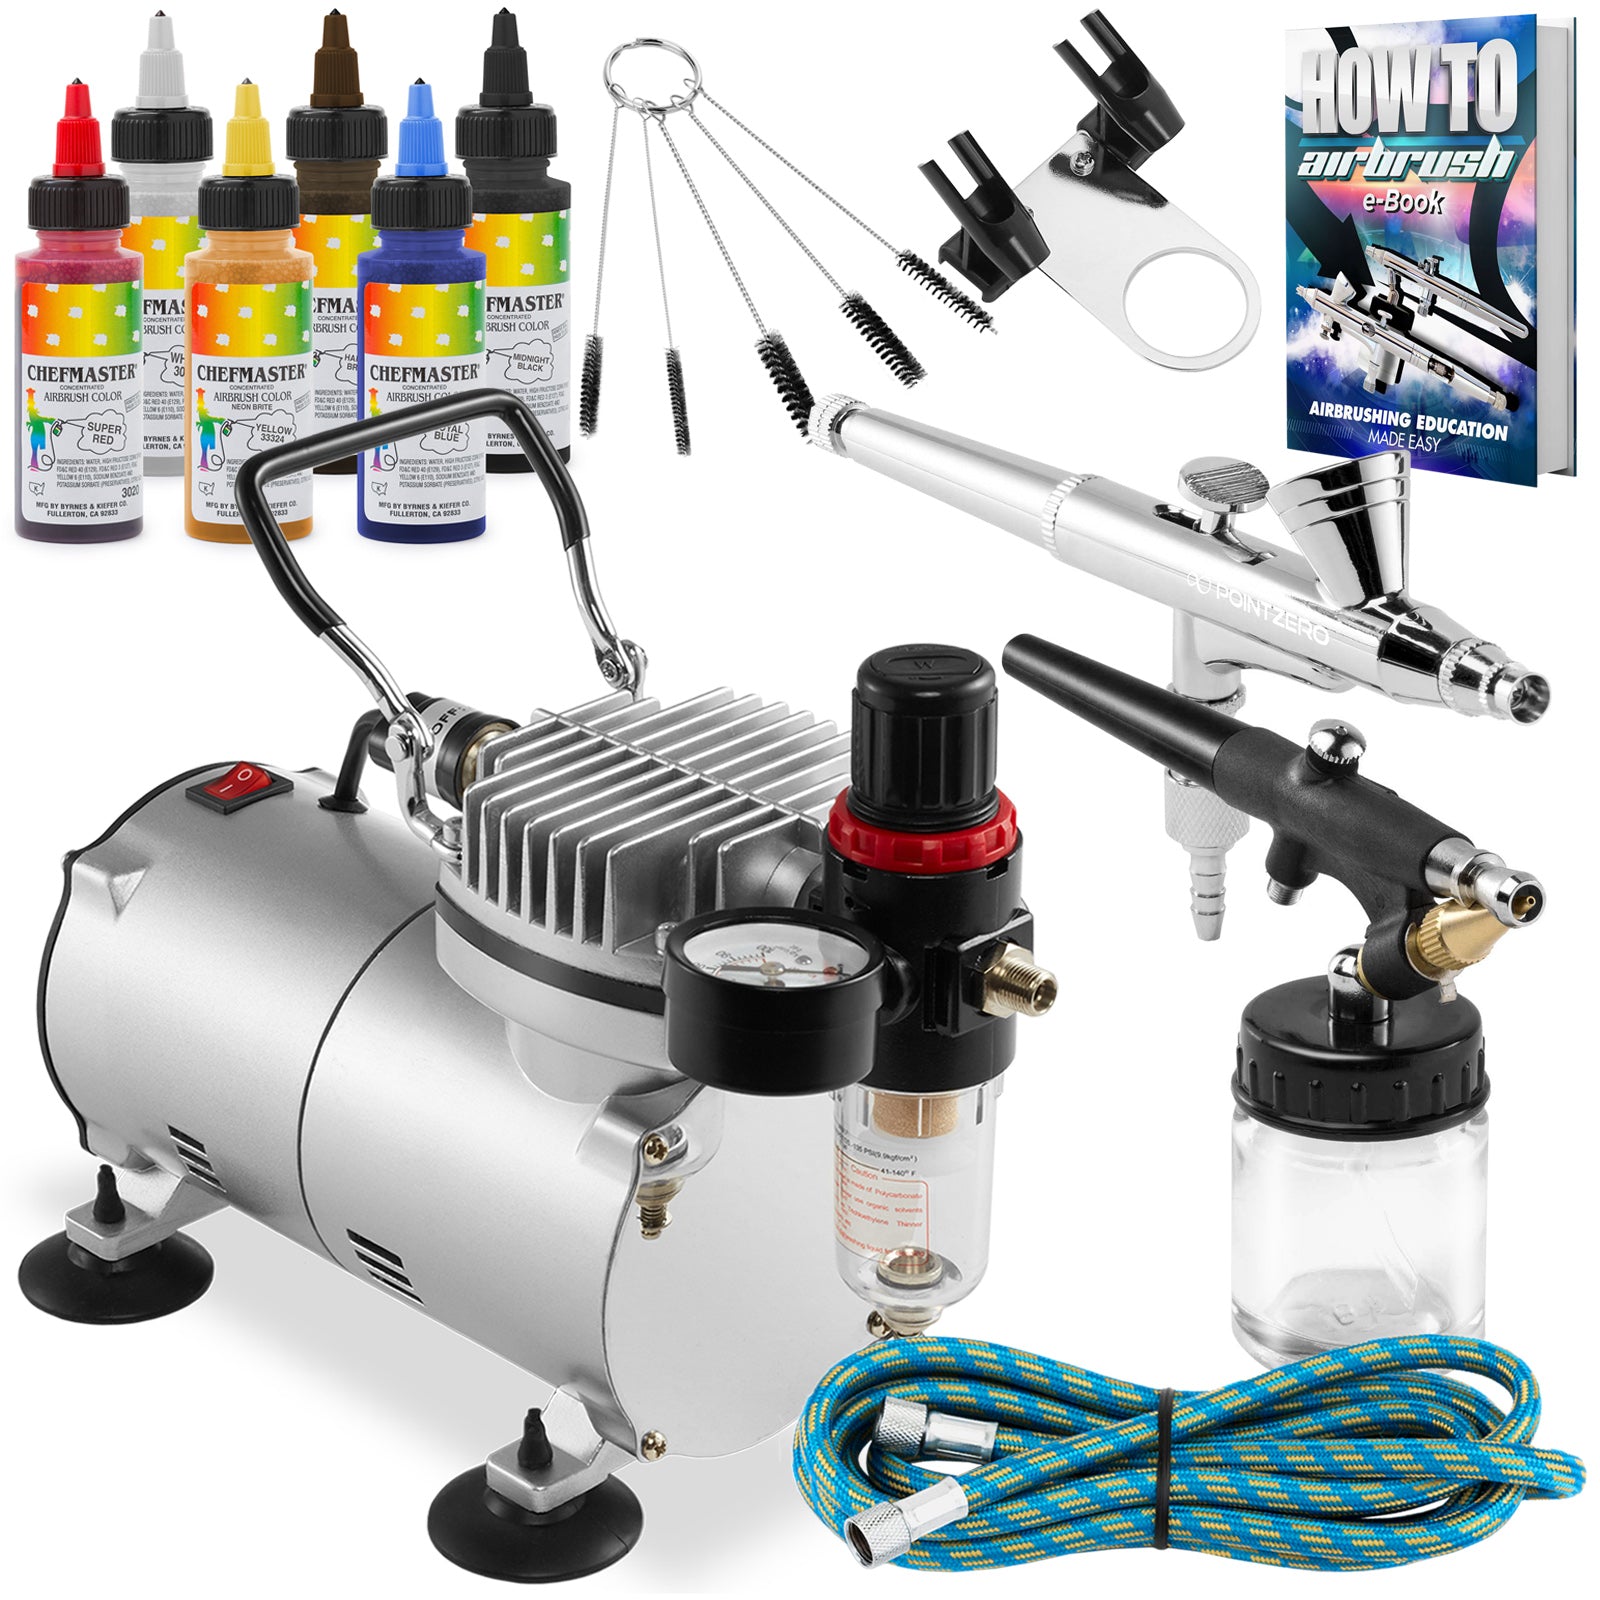 Buy Airbrush For Cake Decorating online